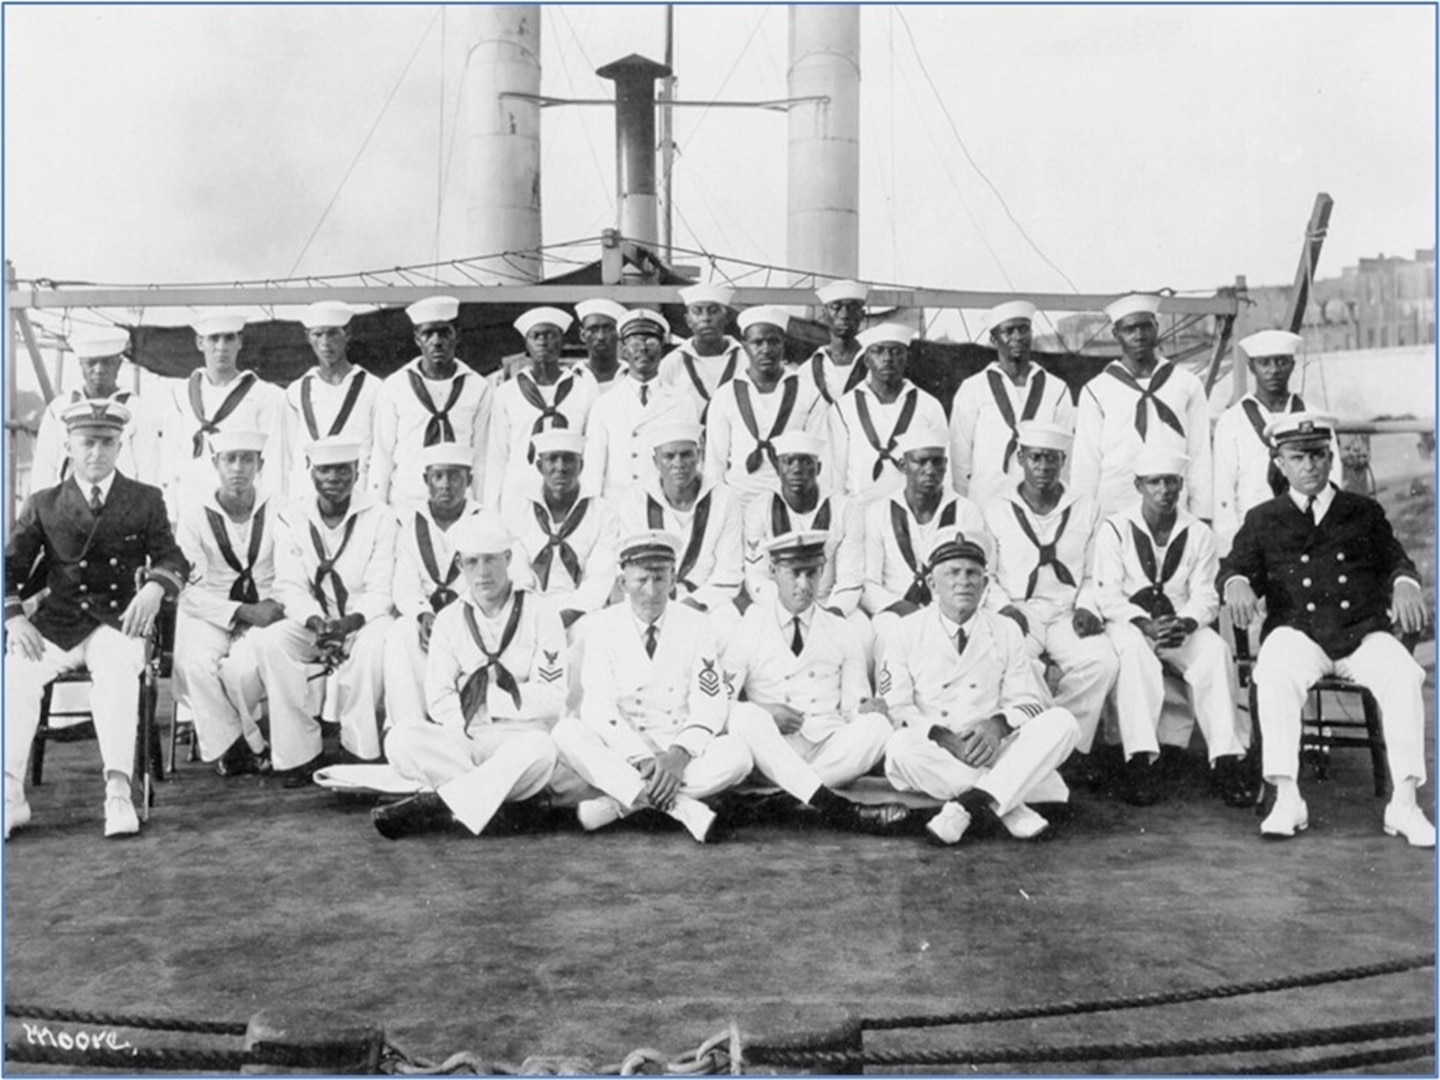 The mixed-race crew of African American enlisted men, with white officers and NCOs, on board cutter Yocona in 1919, at the time of the U.S. government’s segregation policy. (U.S. Coast Guard)